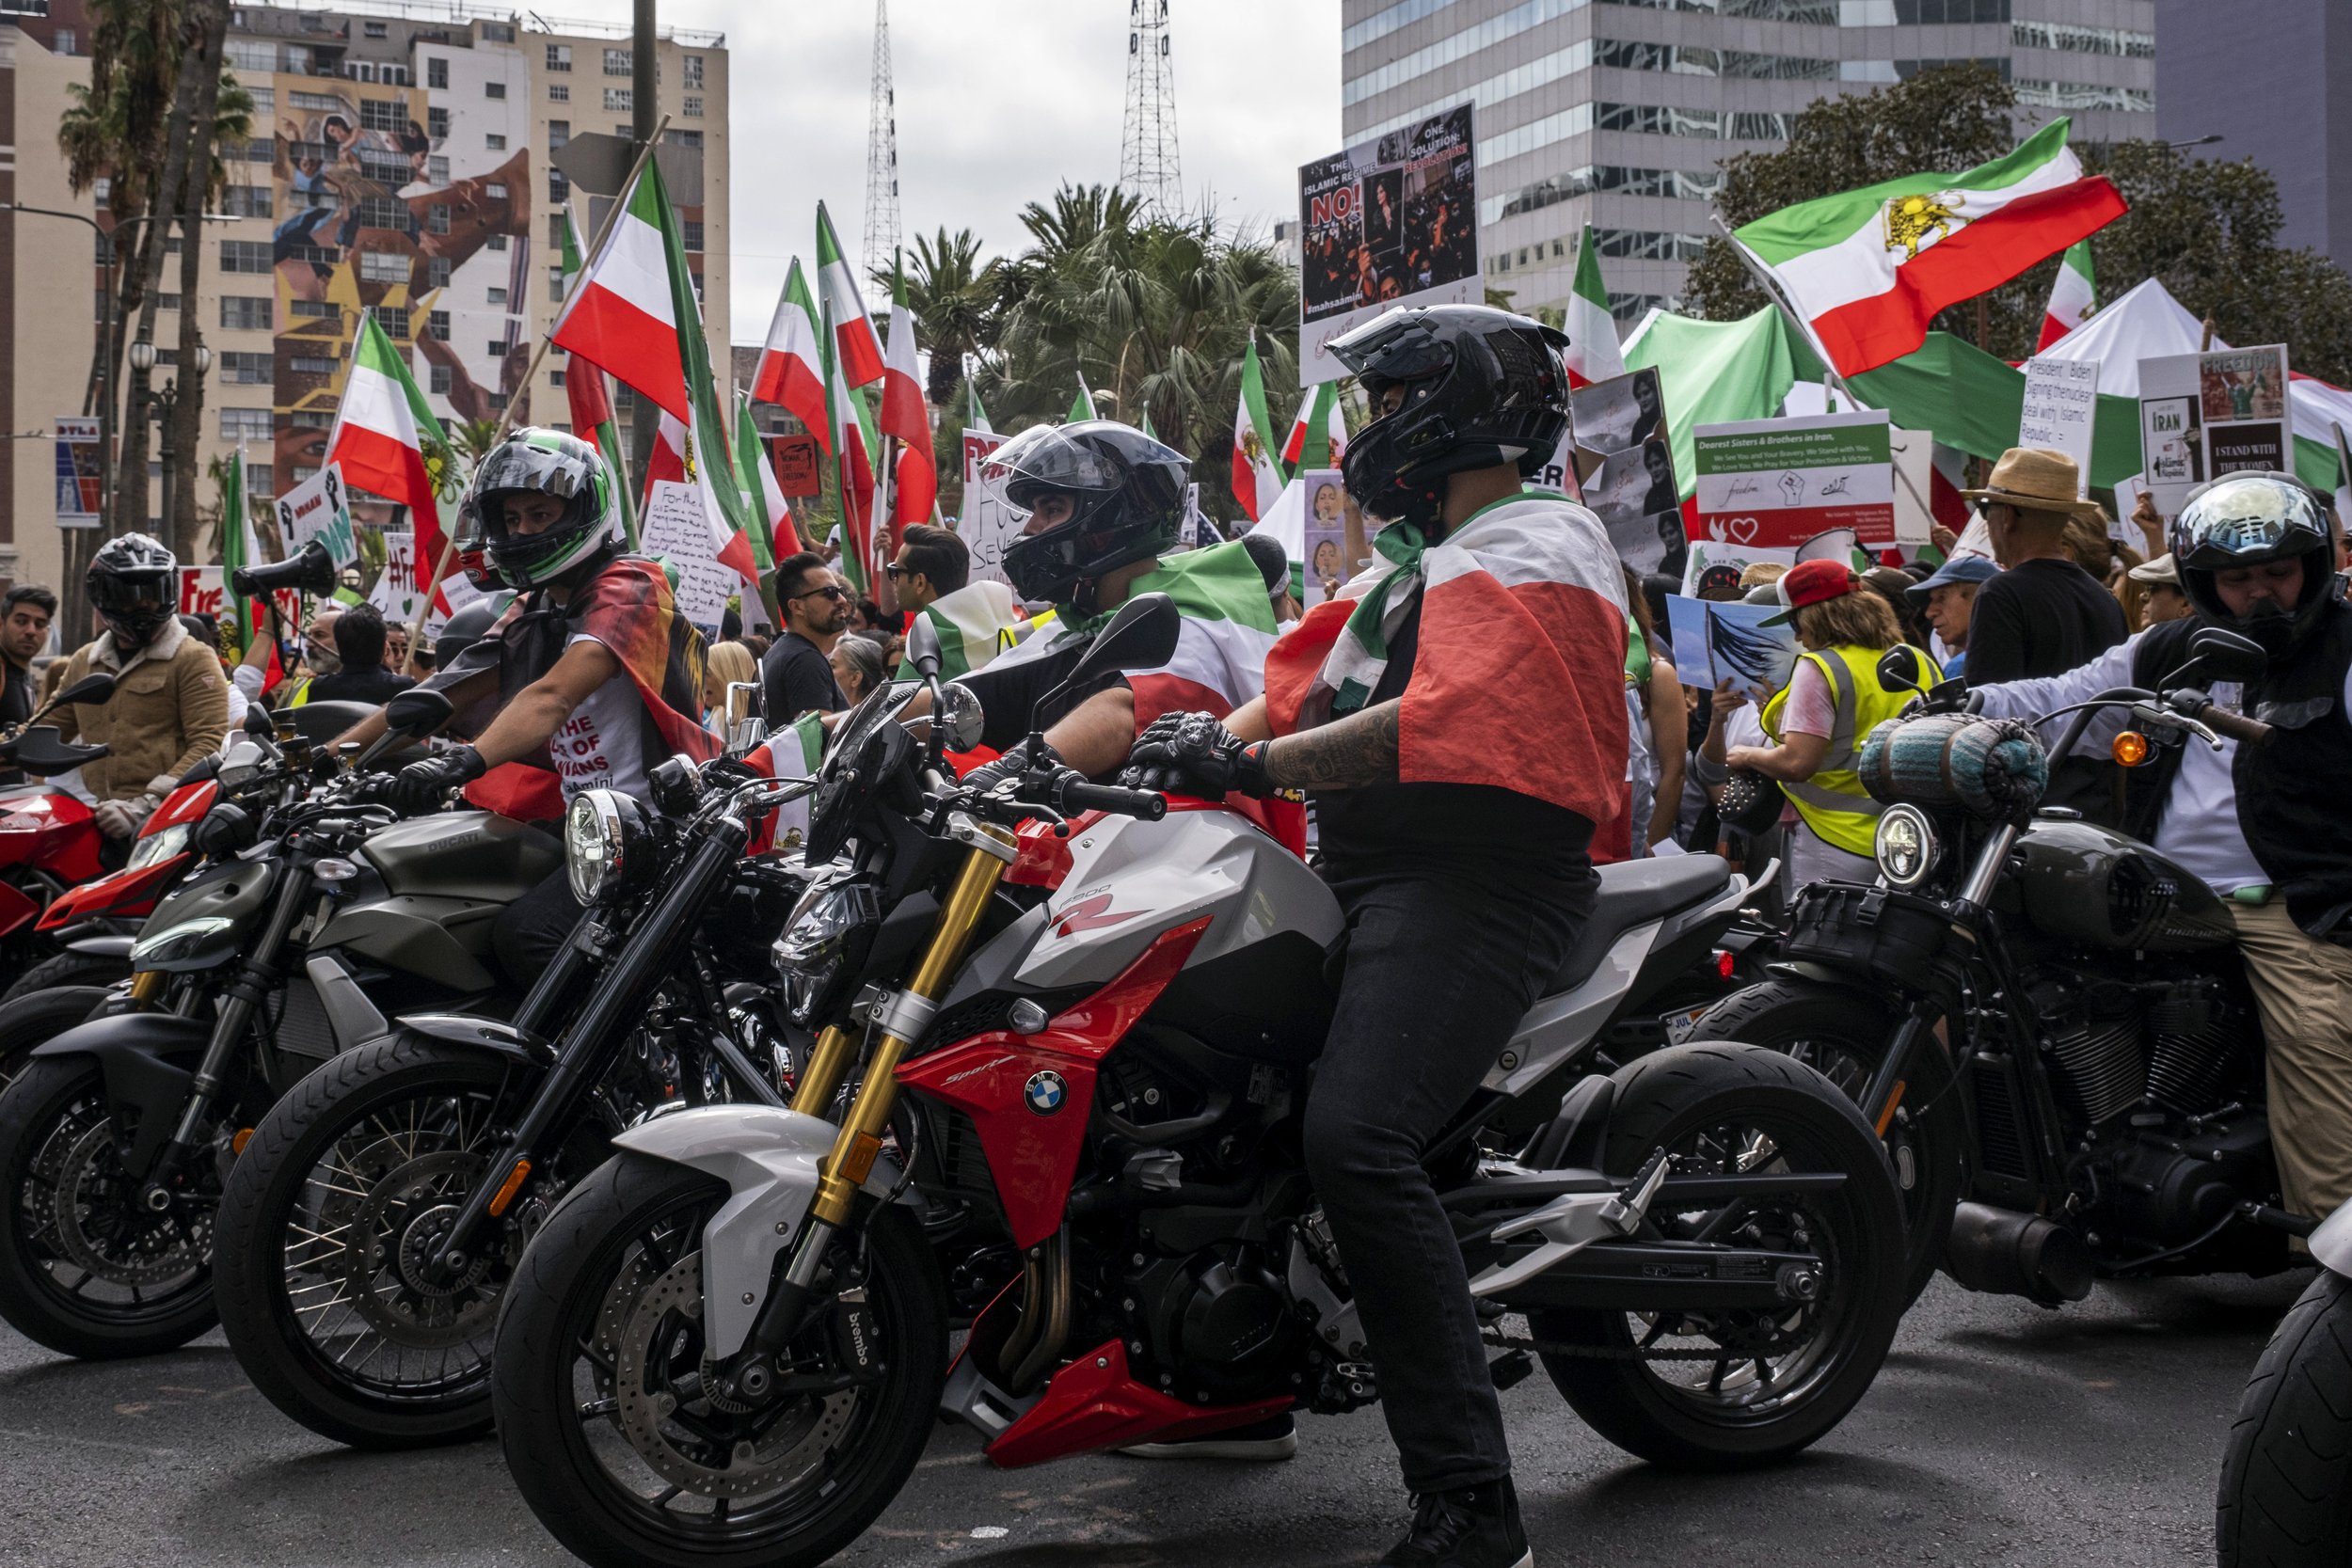  Motorcyclists line up in front of Pershing Square, to lead the march to City Hall  for the Freedom Rally for Iran, in Downtown Los Angeles, Calif., on October 1. (Anna Sophia Moltke | The Corsair) 